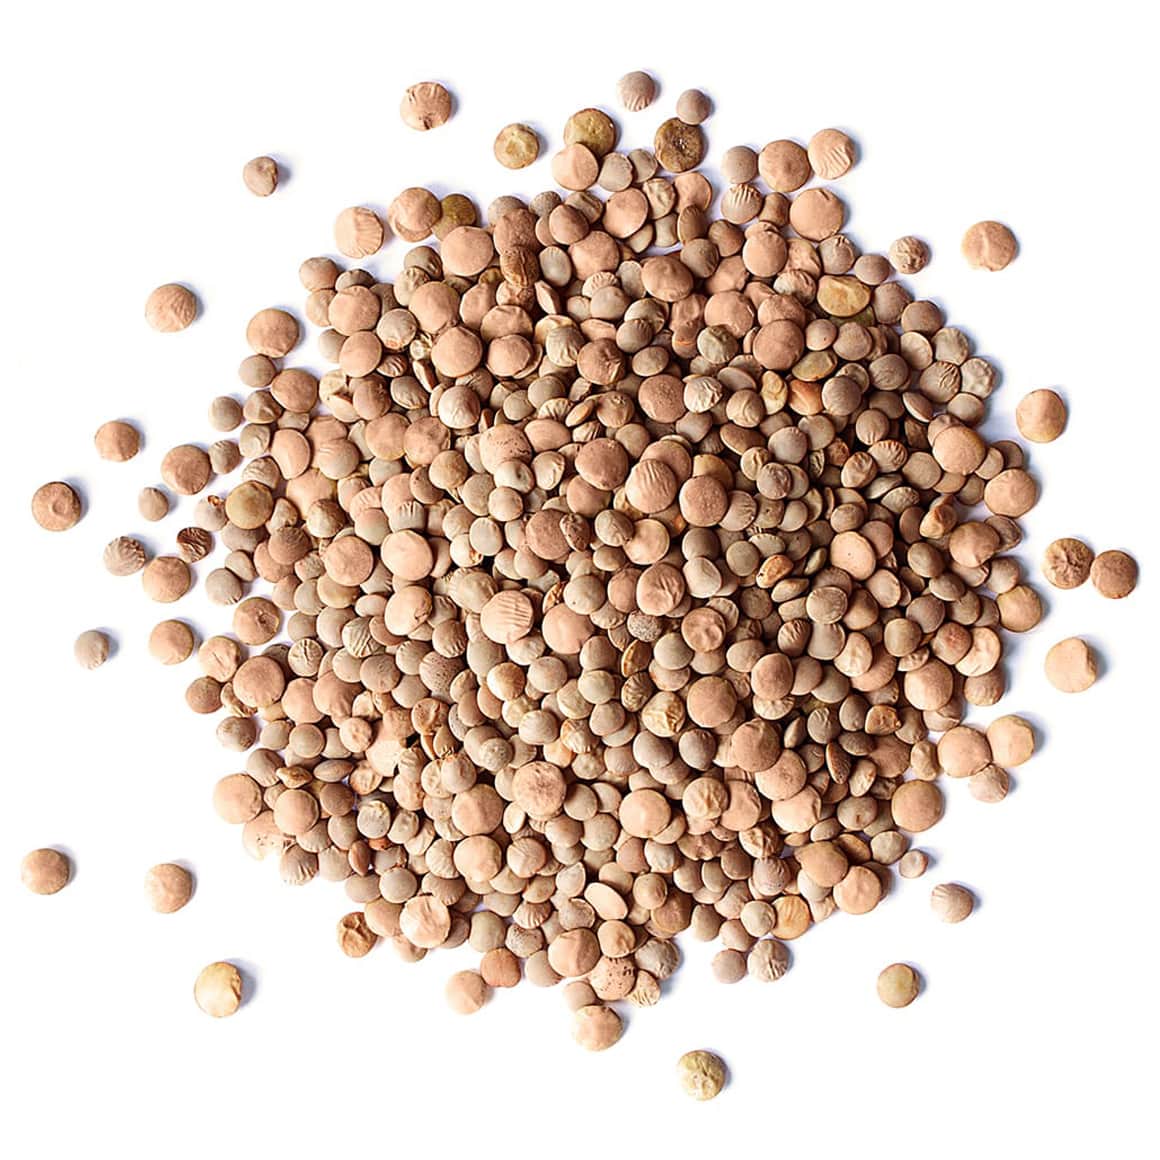 Organic Red Lentils Whole Min 